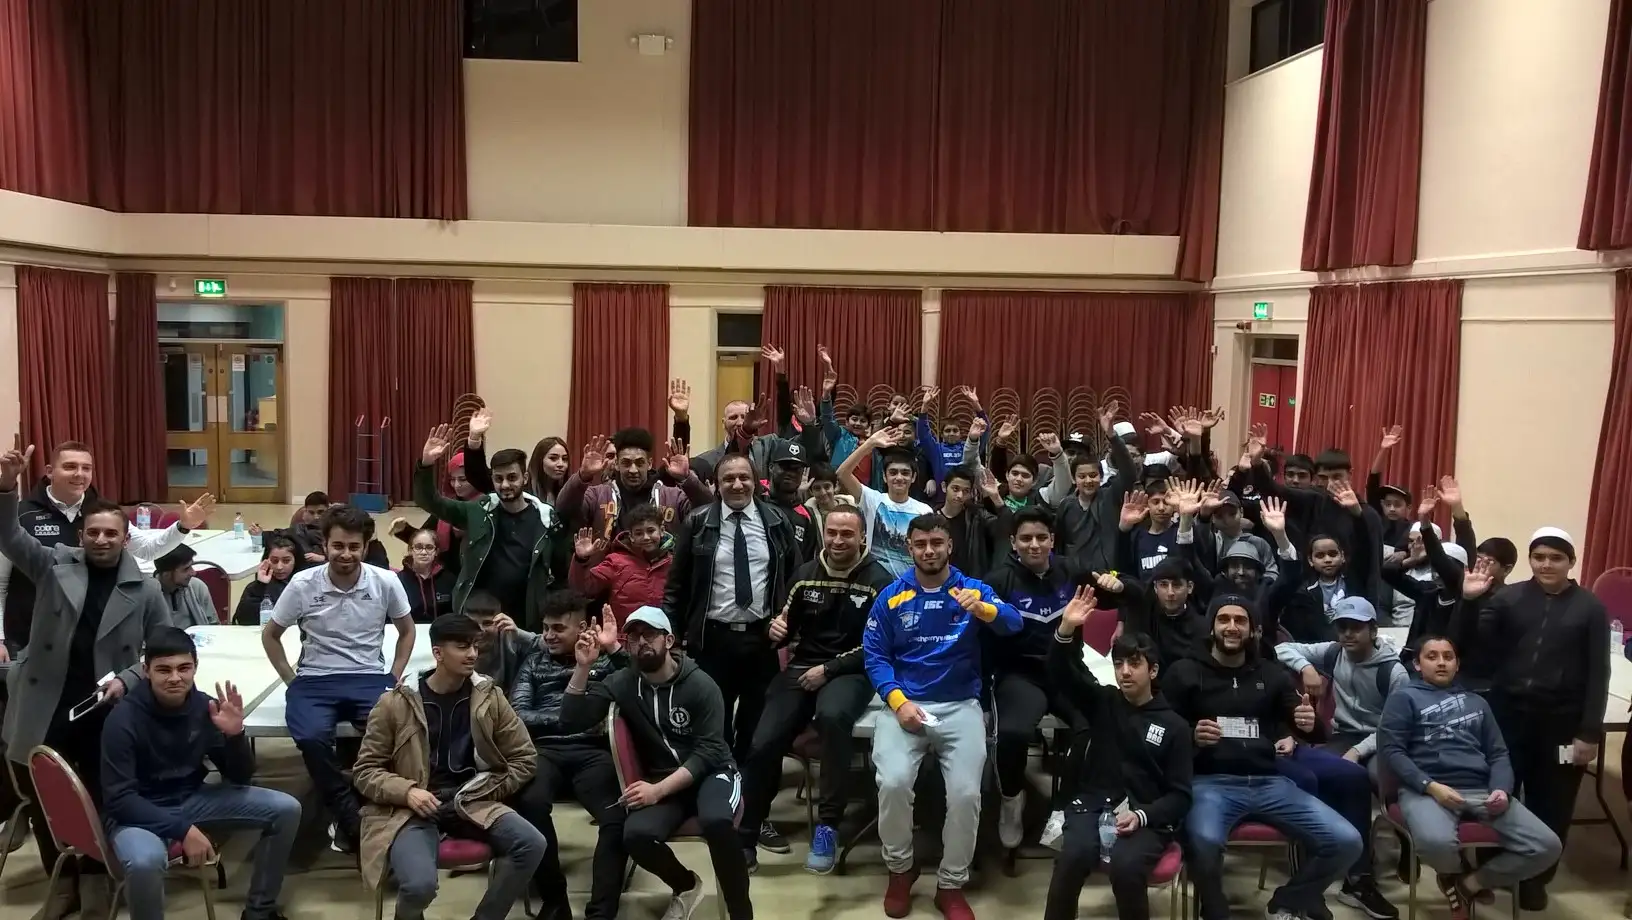 Communities connect to celebrate Asian participation in rugby league